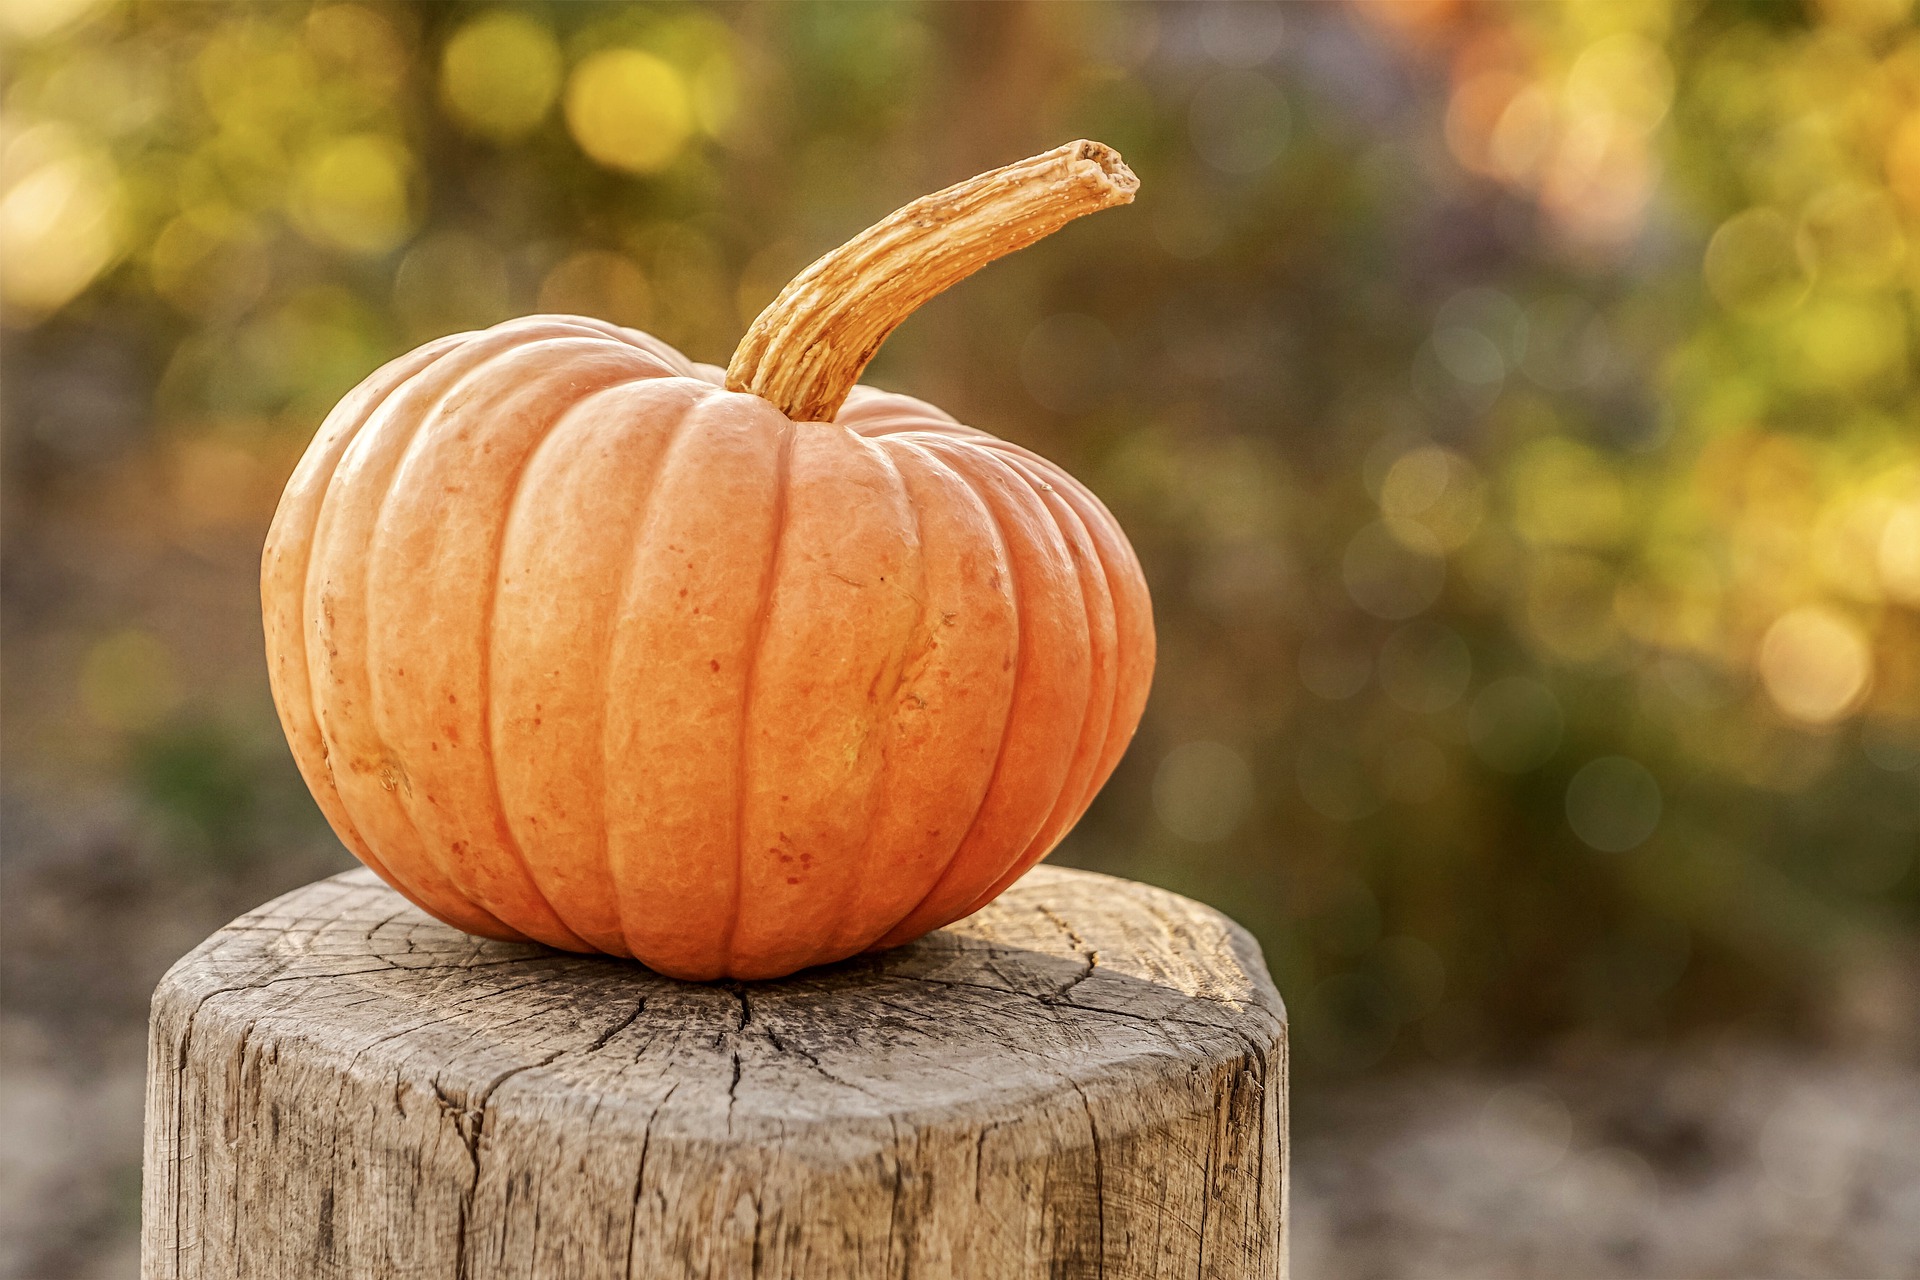 SIMPLE PUMPKIN CRAFTS FOR FALL